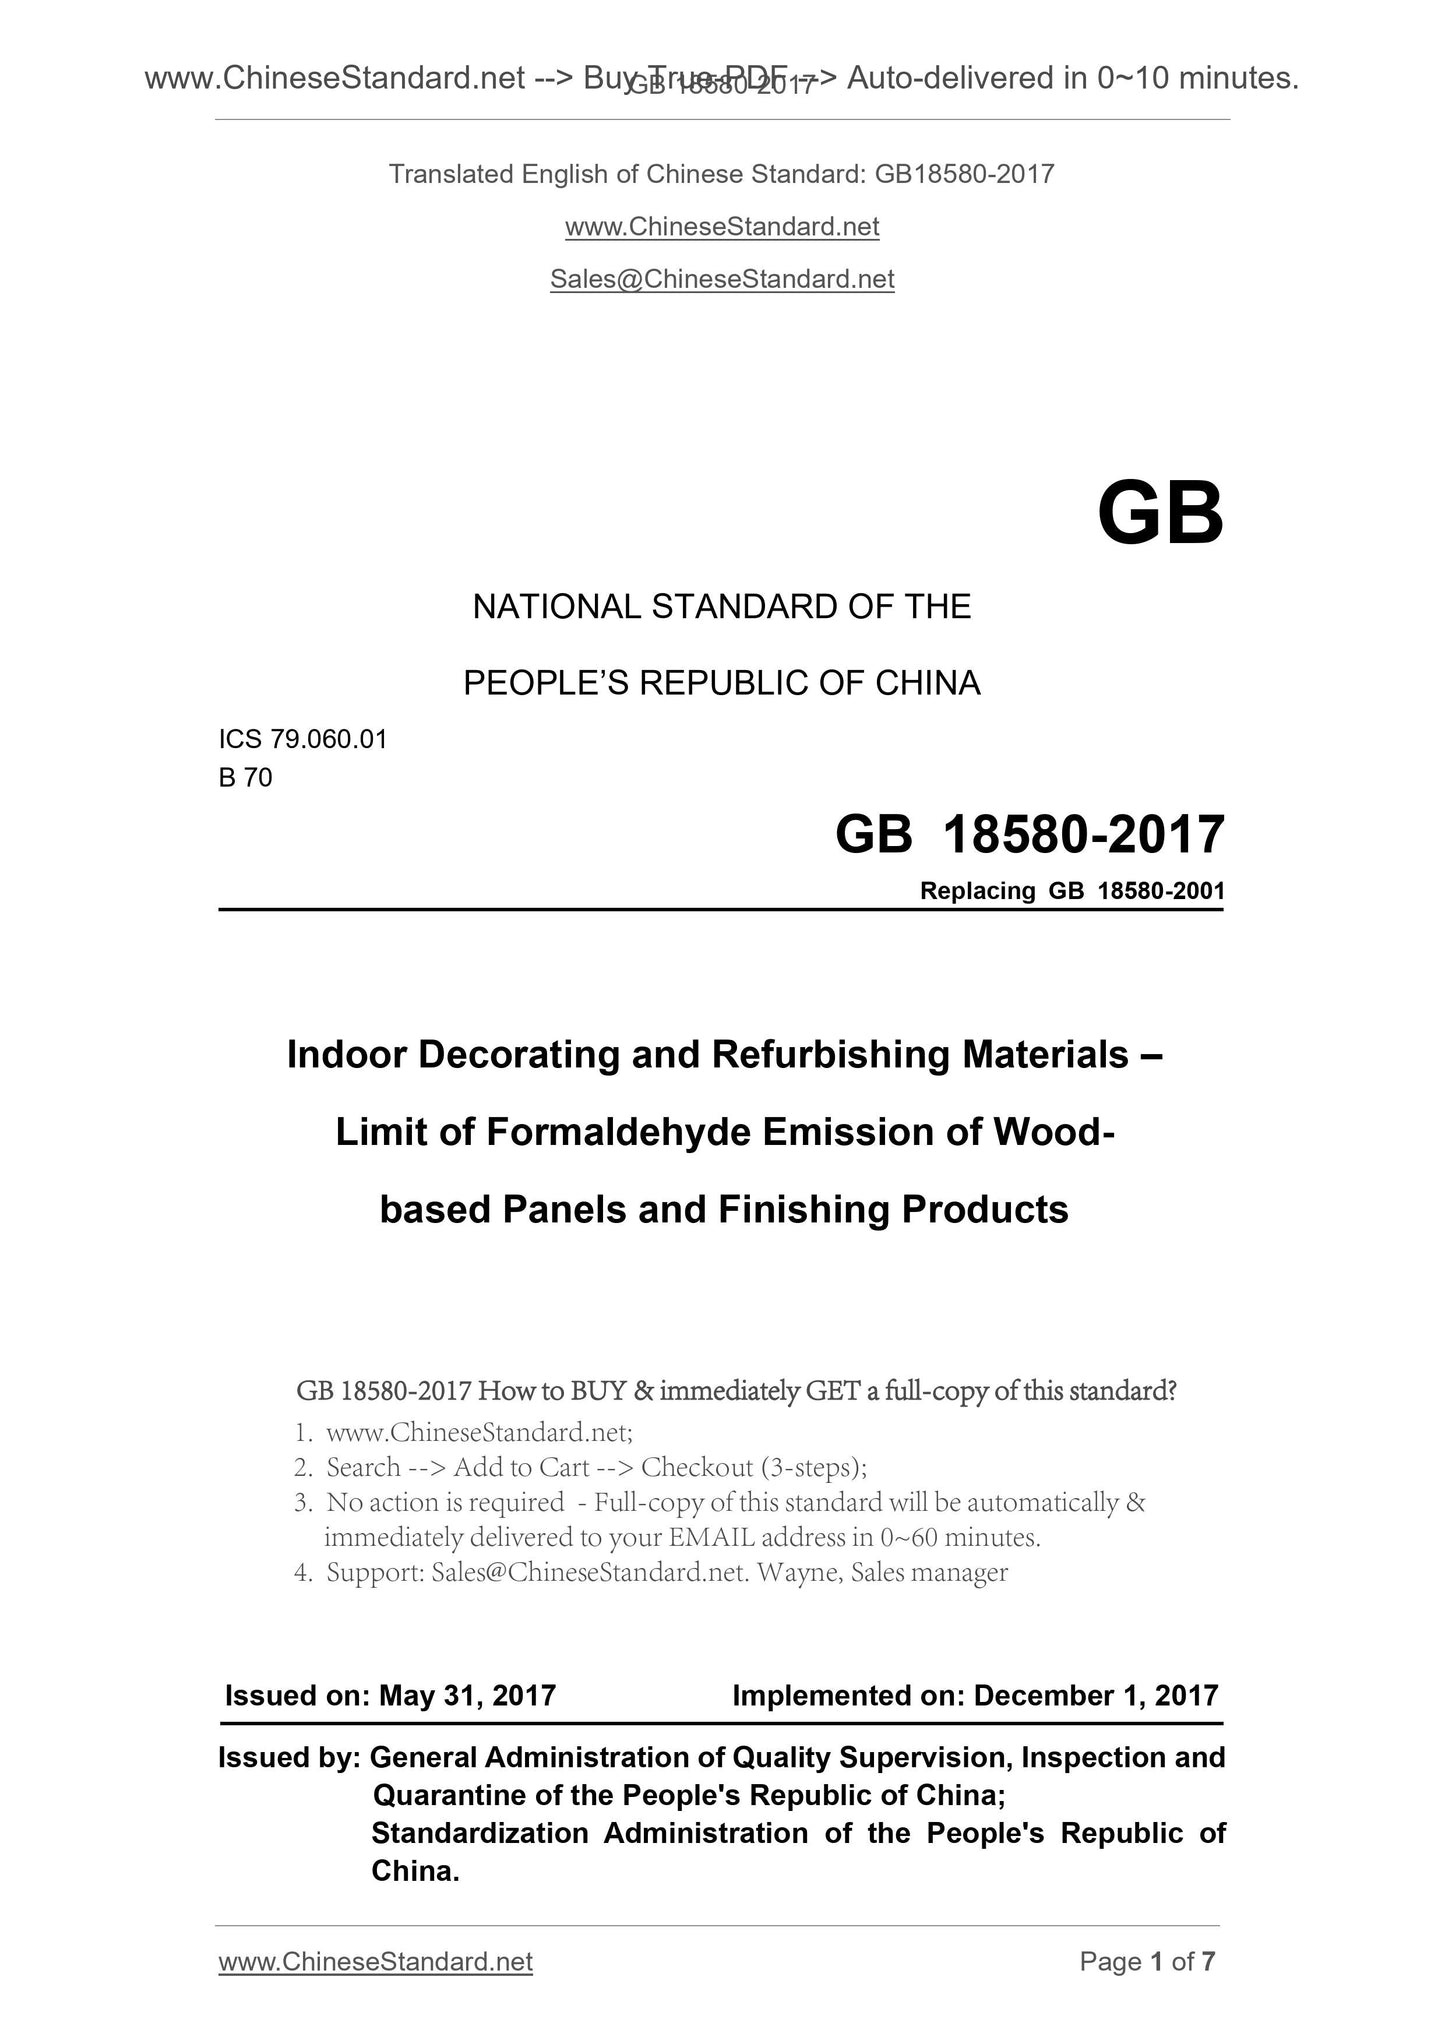 GB 18580-2017 Page 1